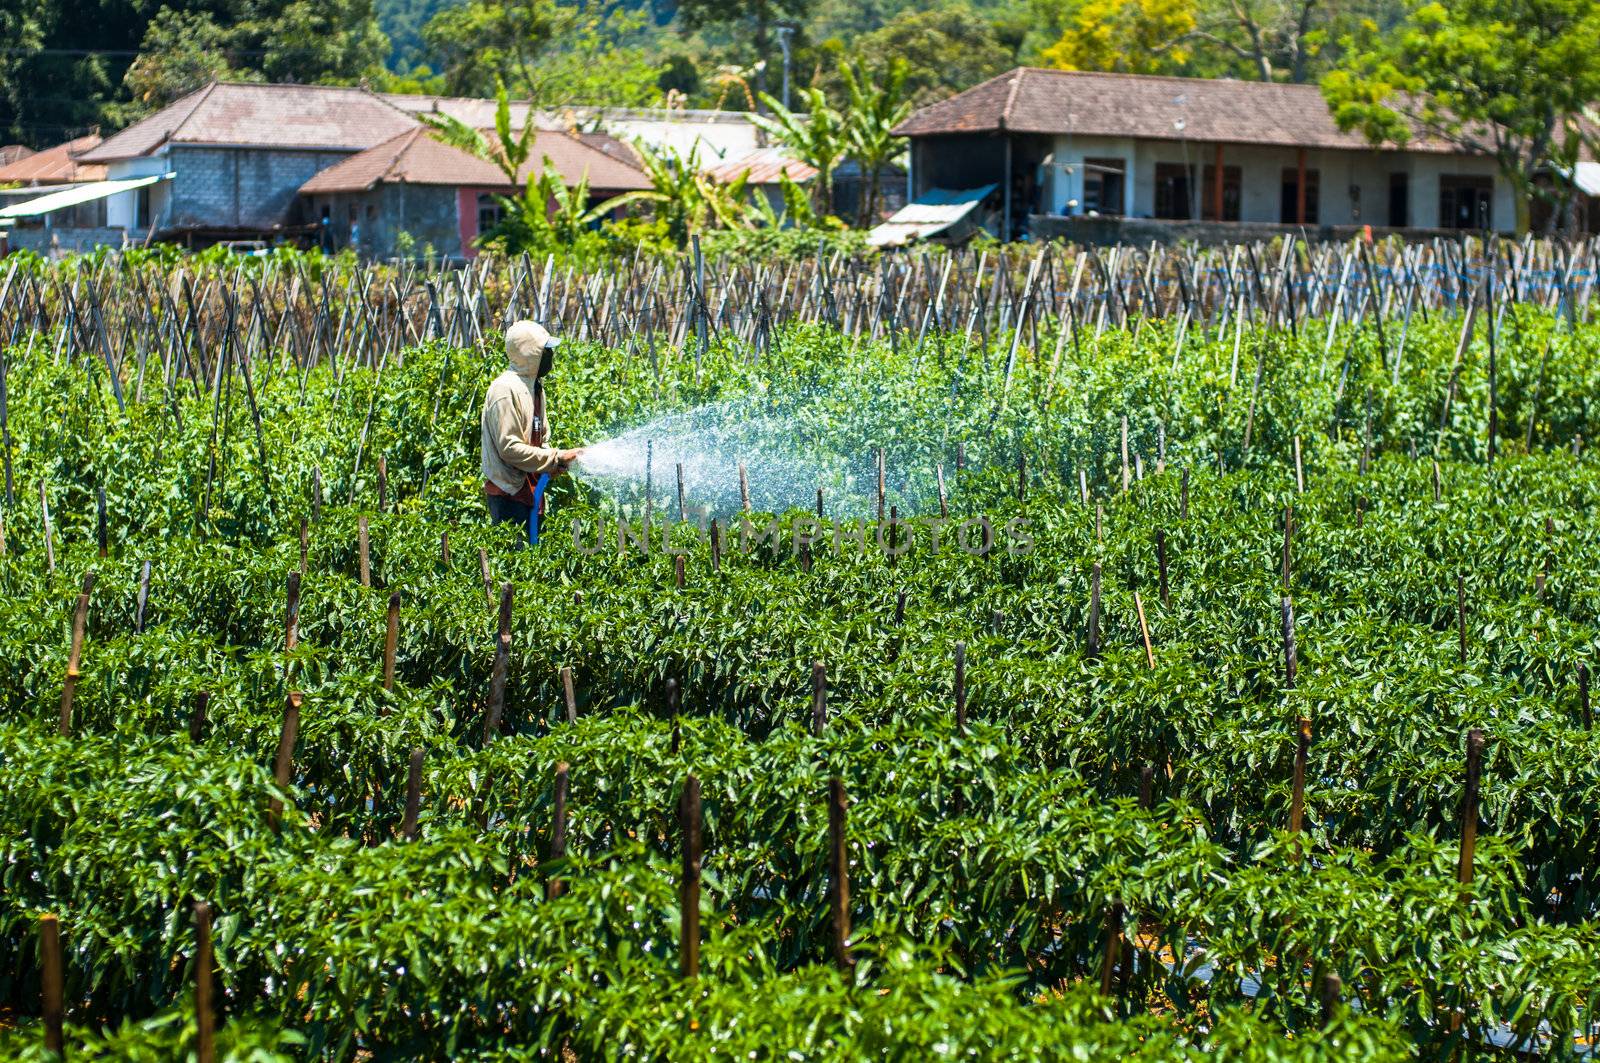 Farmer spraying pesticide on his field by nvelichko